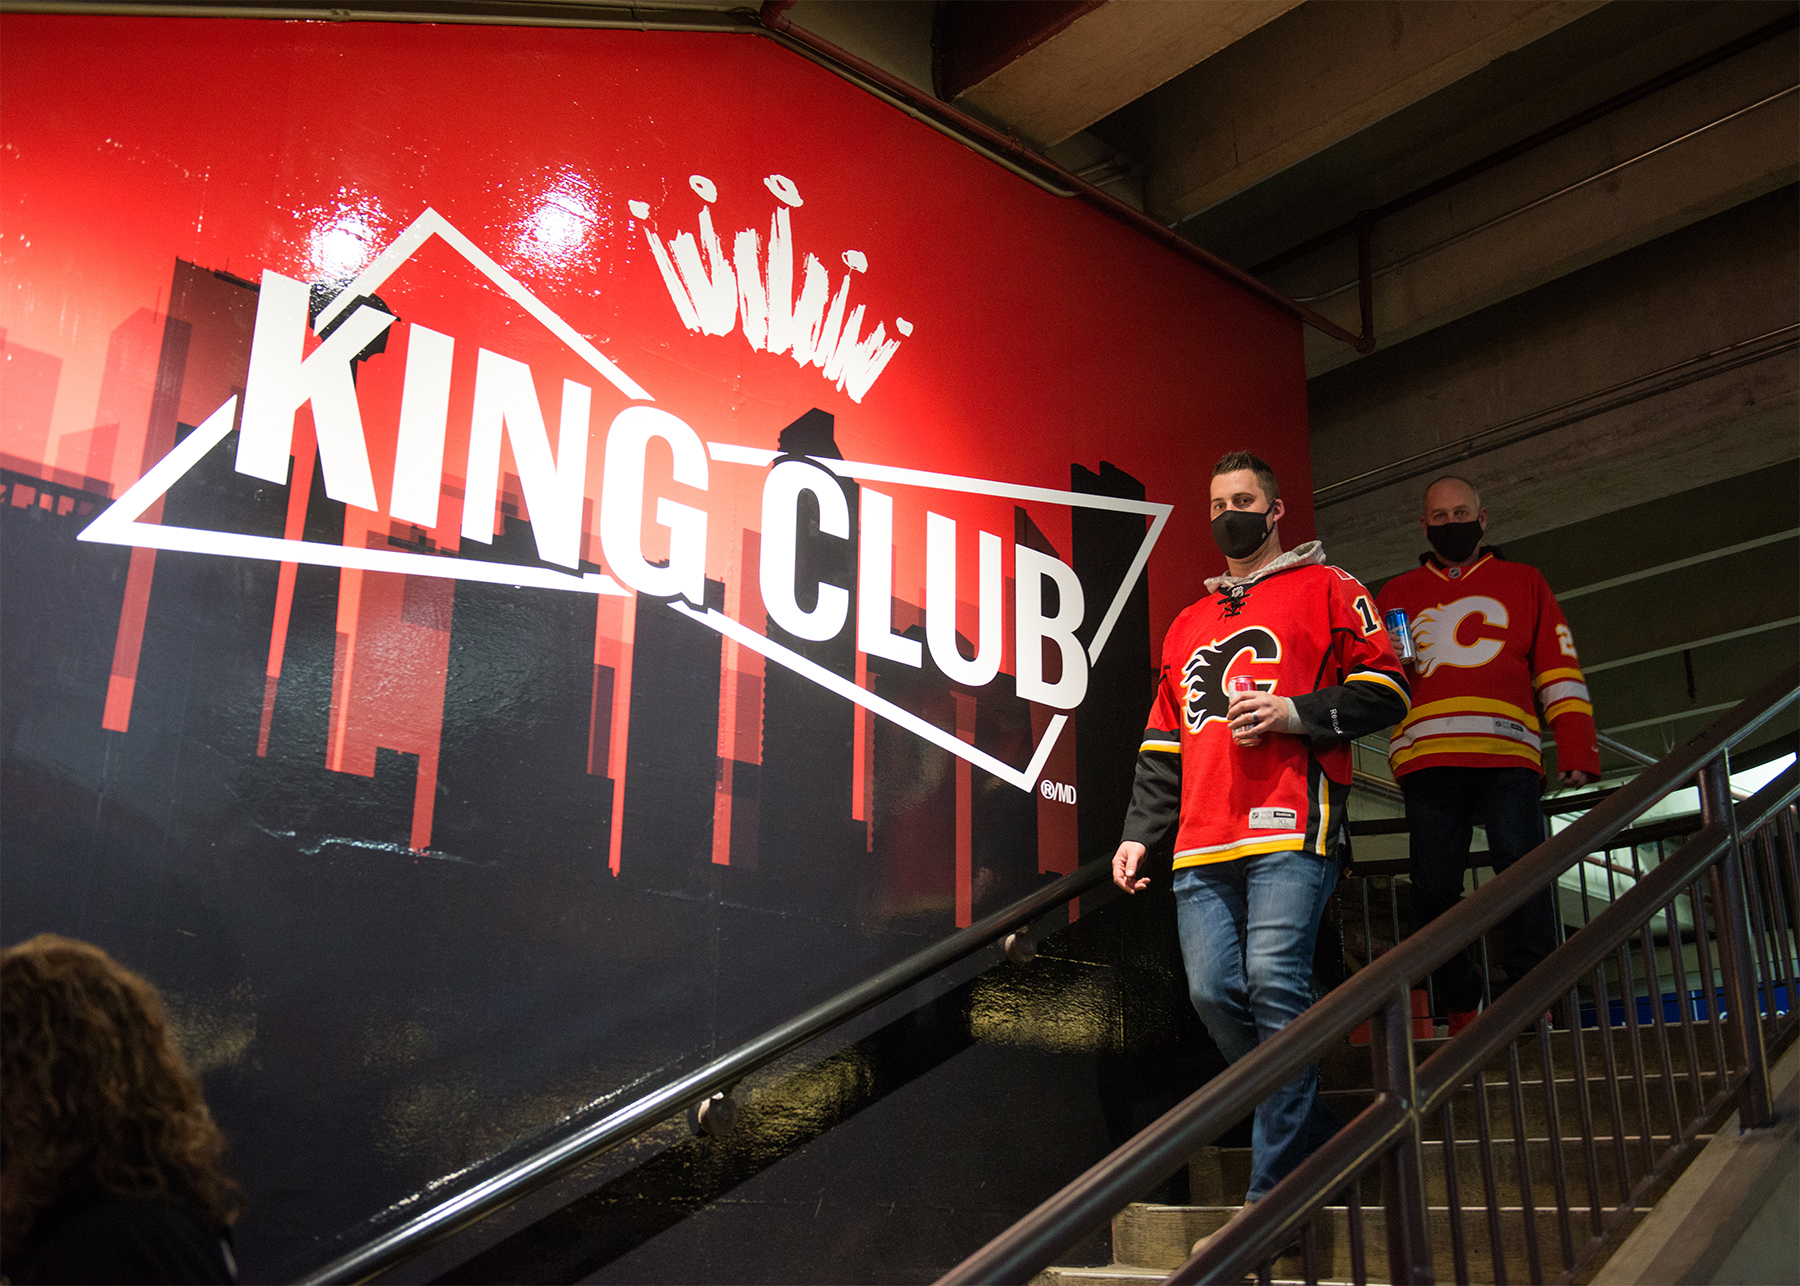 Two men wearing Calgary Flames jerseys walking down the stairs while a large King Club logo is on the wall next to them